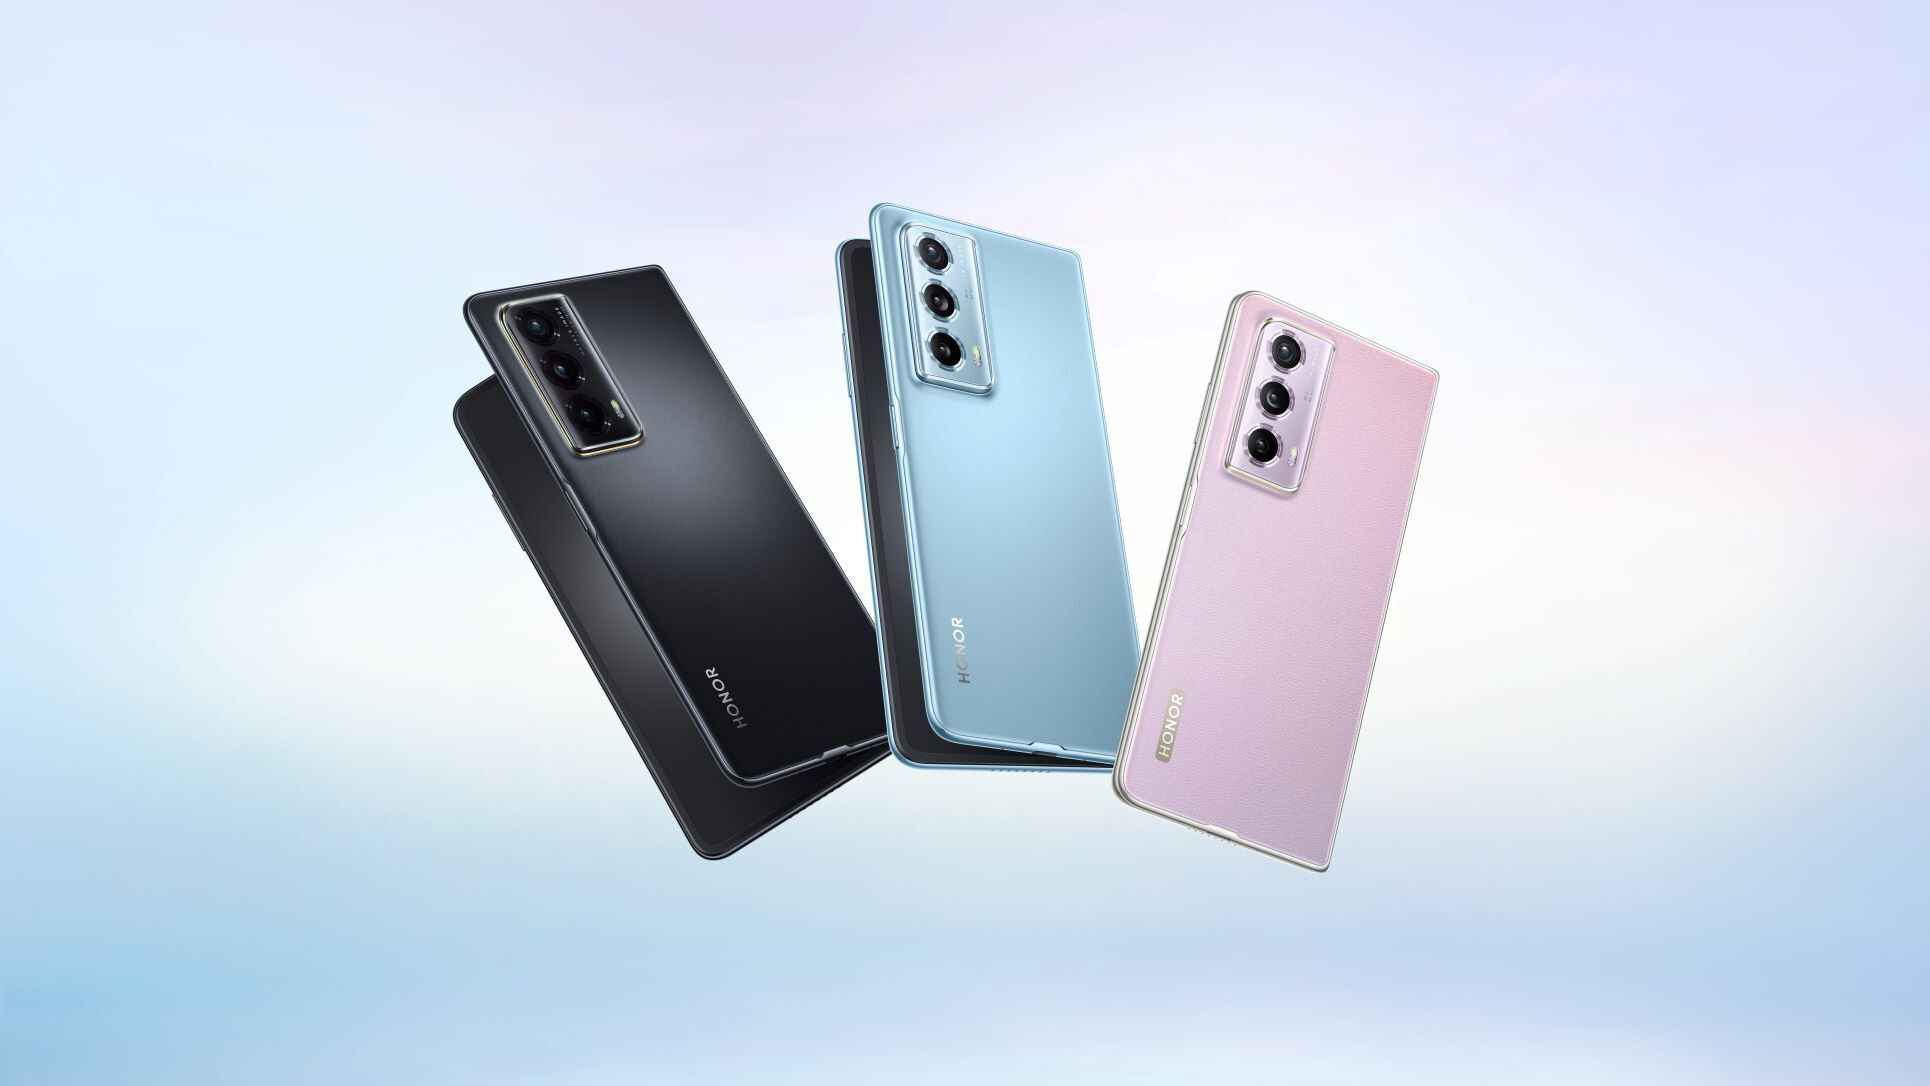 The Honor Magic Vs2 in Midnight Black, Coral Purple, and Glacier Blue - The Honor Magic Vs2 uses a 3D printed hinge and an aerospace-grade magnesium alloy body